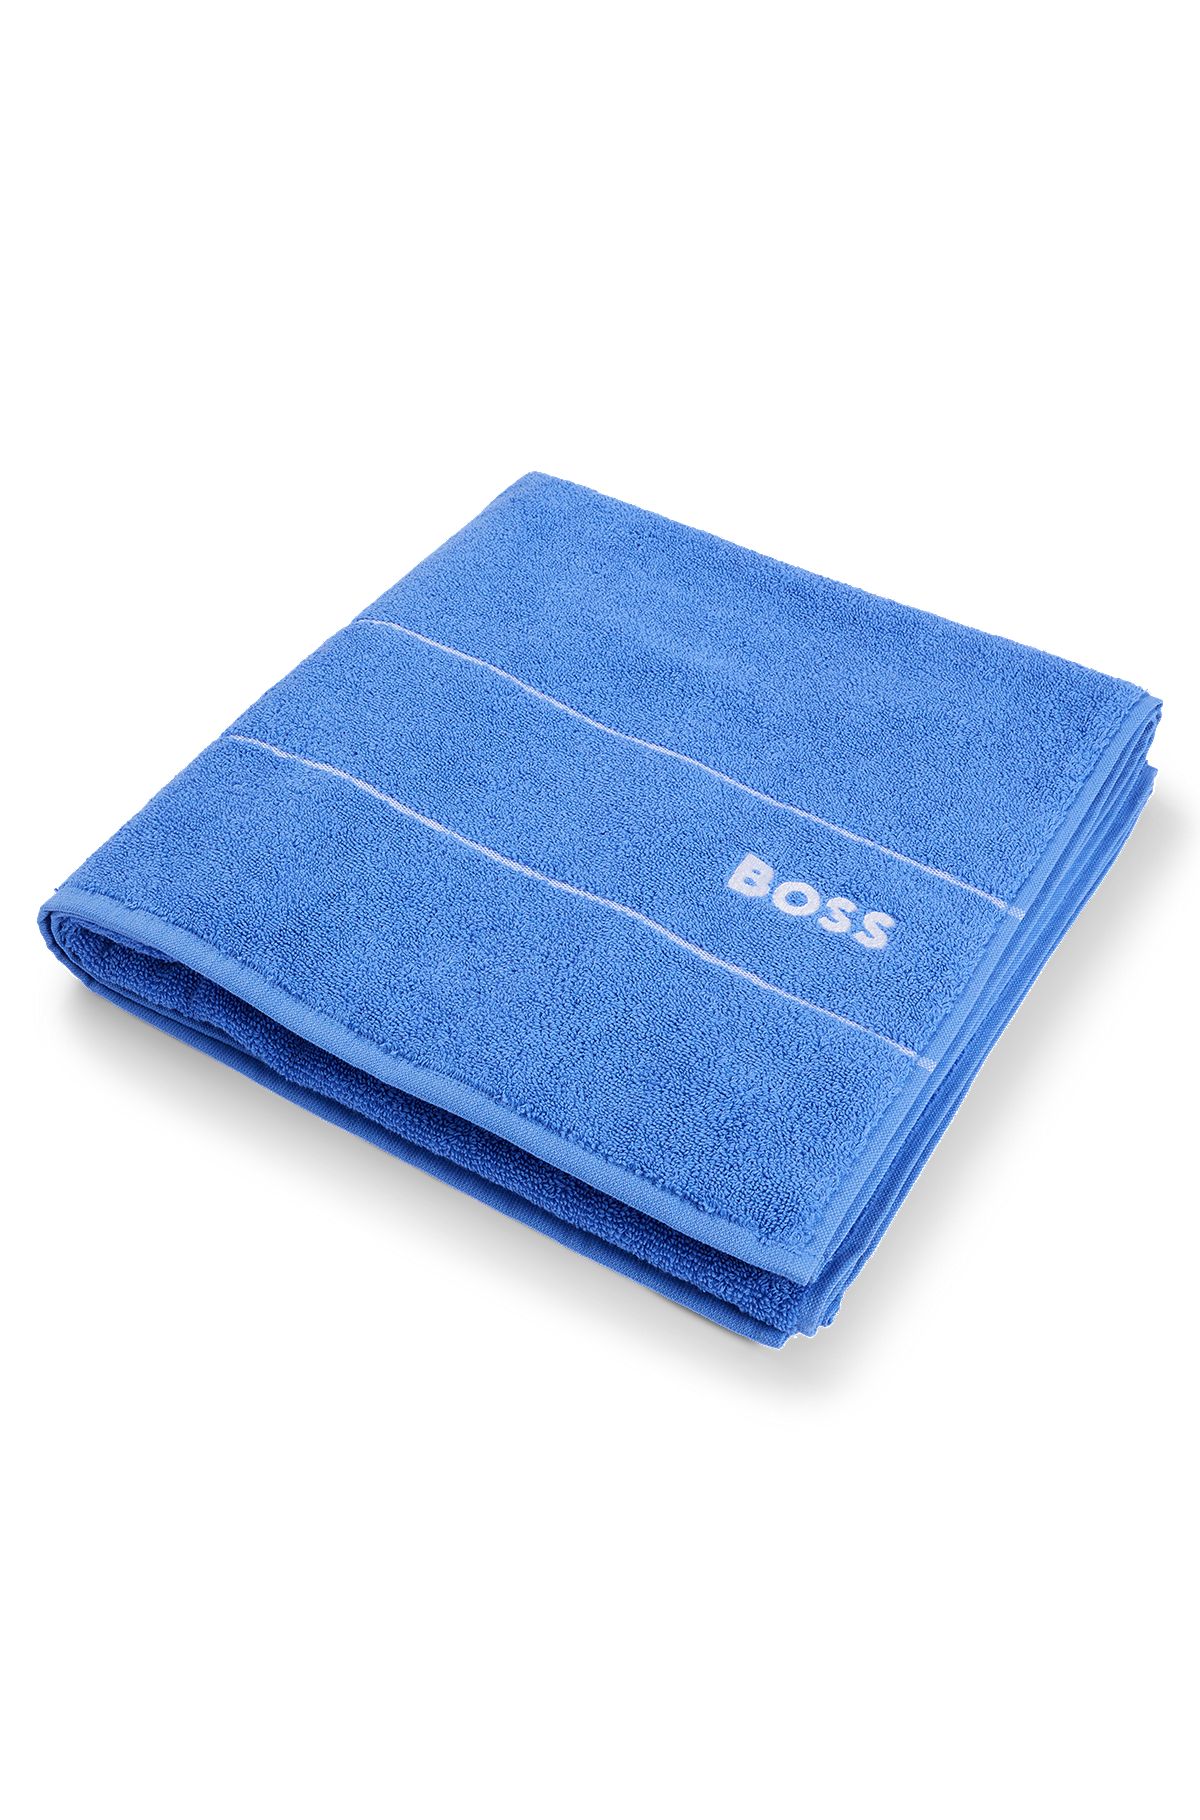 Cotton bath towel with white logo embroidery, Blue